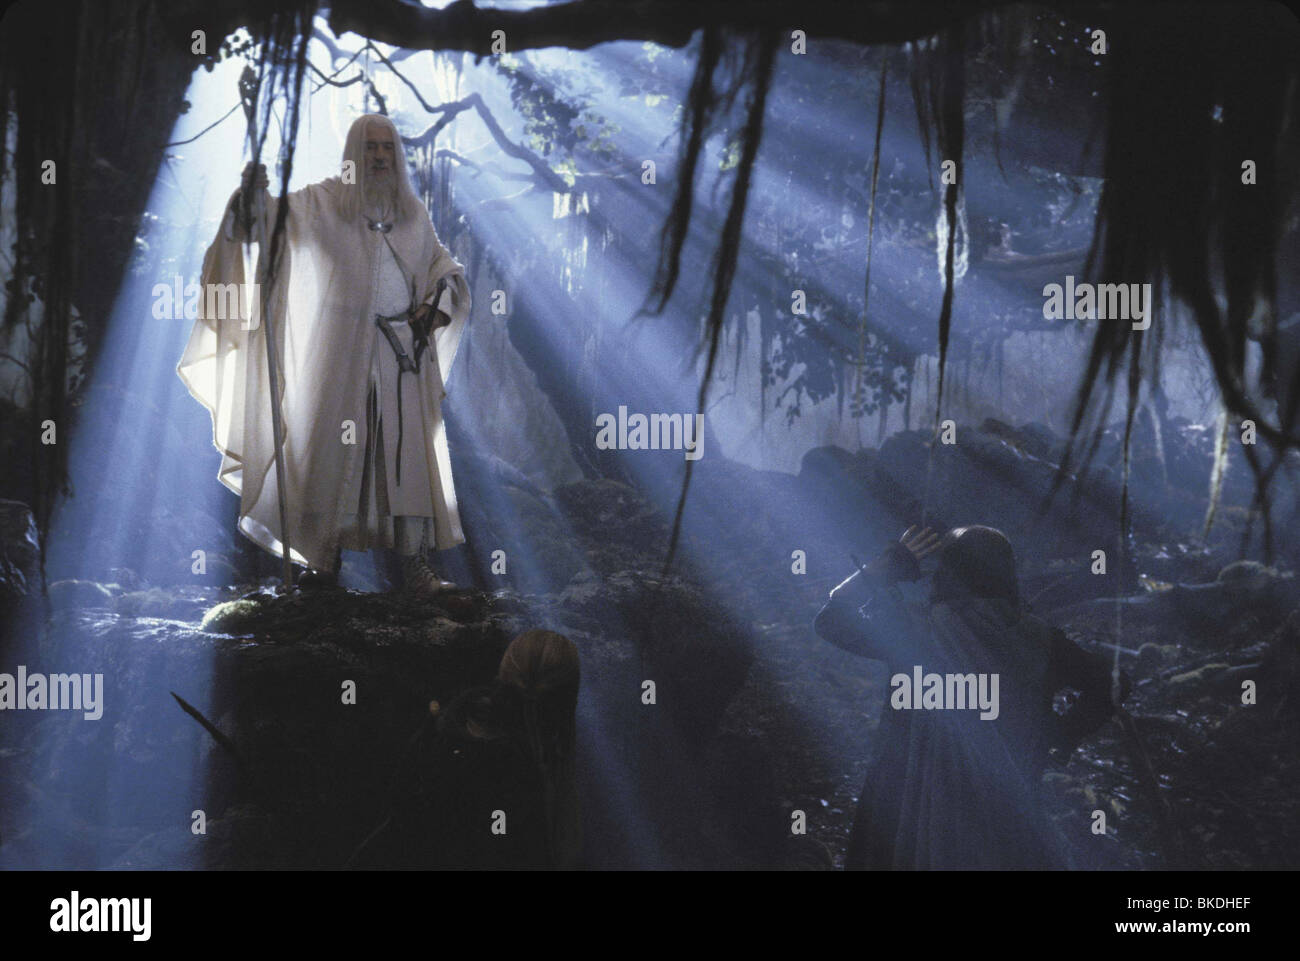 THE LORD OF THE RINGS: THE TWO TOWERS (2002) IAN MCKELLEN, GANDALF TWRS 002-05 Stock Photo